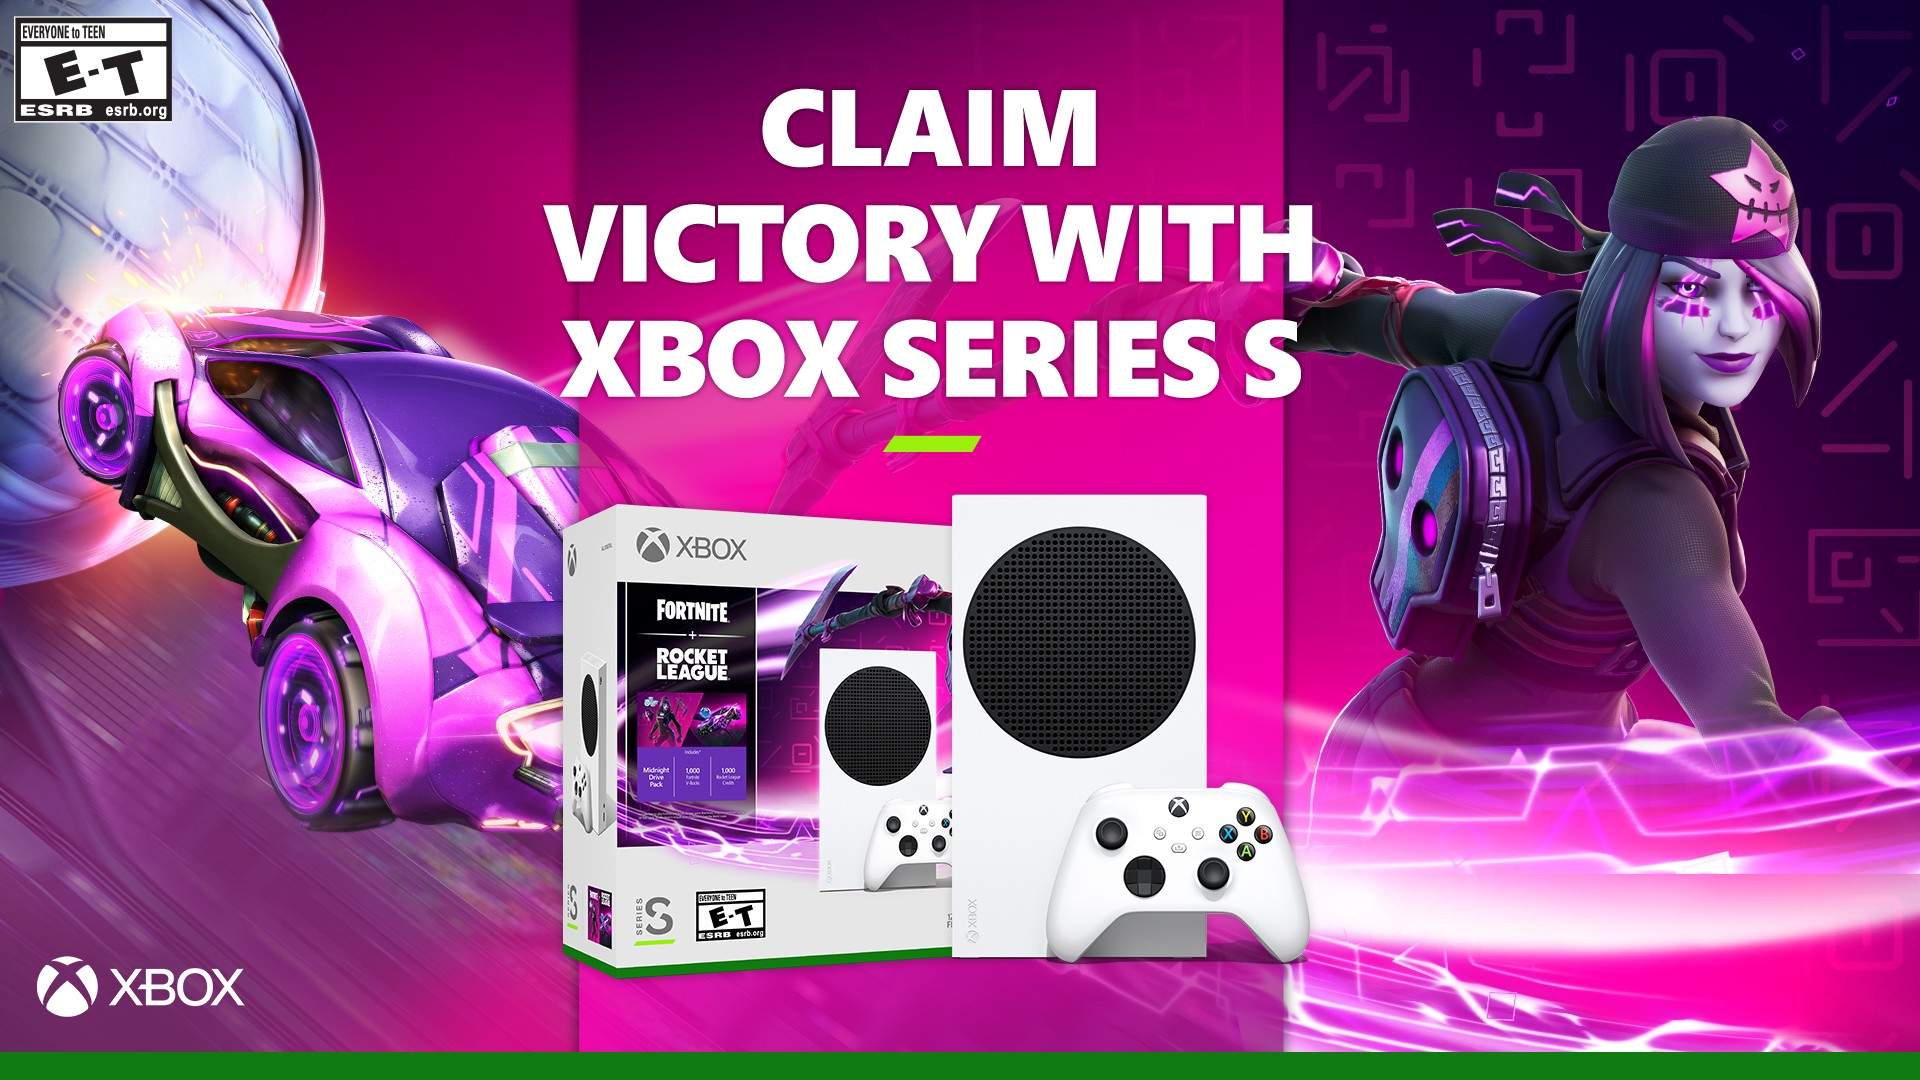 Video For Claim Victory with the New Xbox Series S – Fortnite and Rocket League Bundle